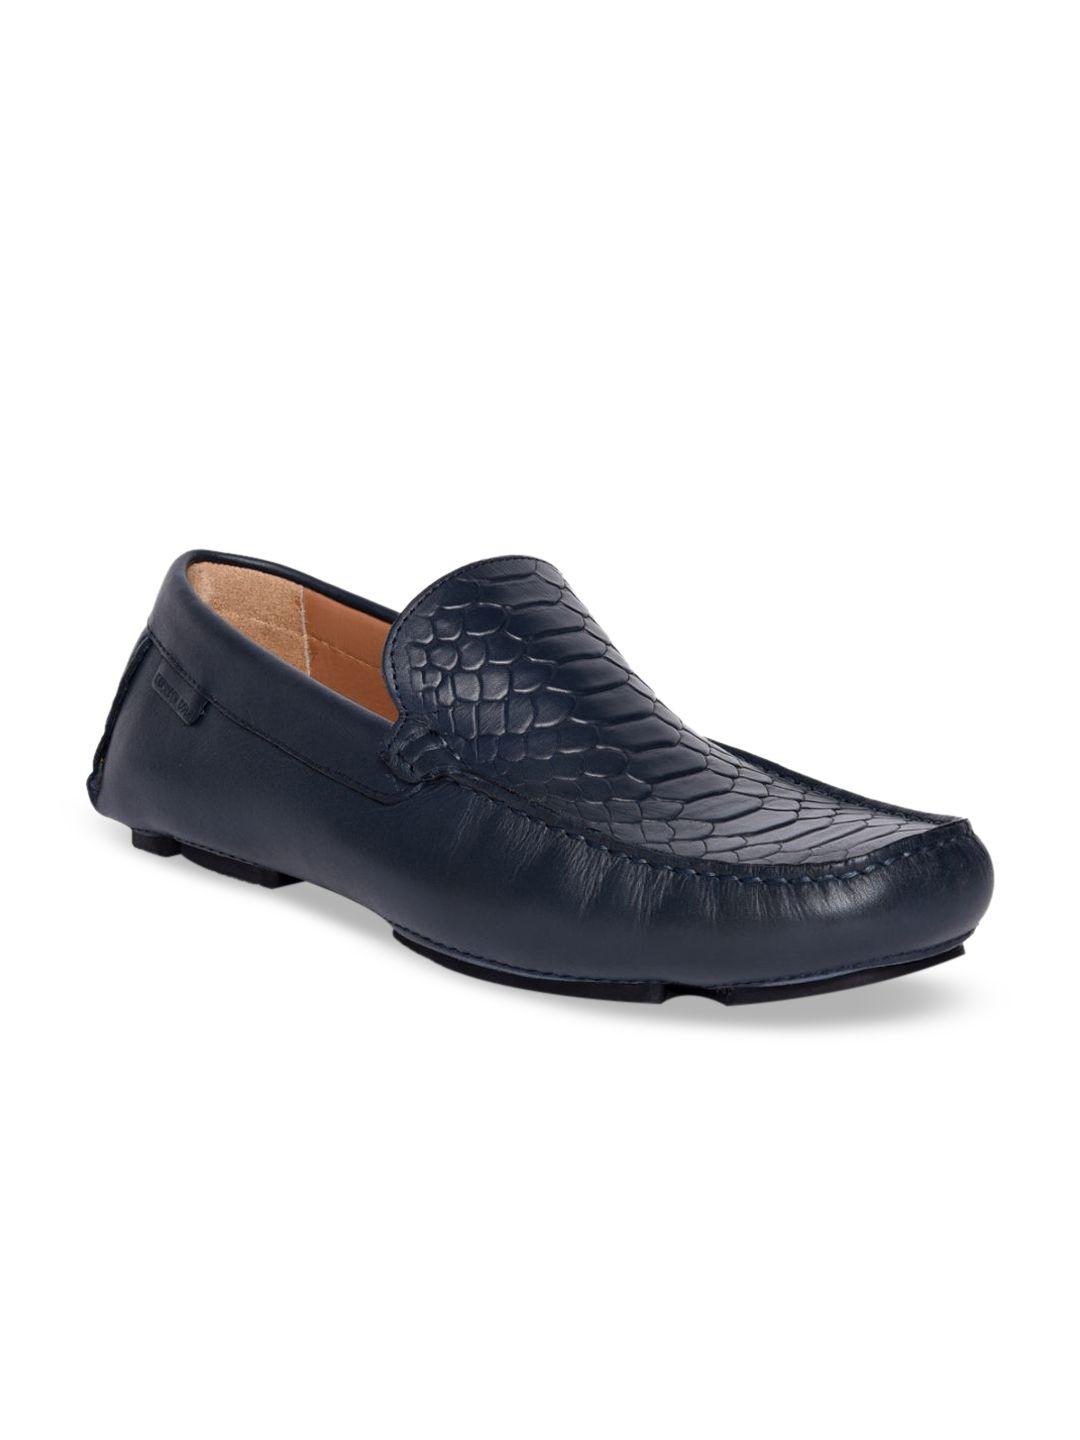 kenneth cole men navy blue textured leather loafers